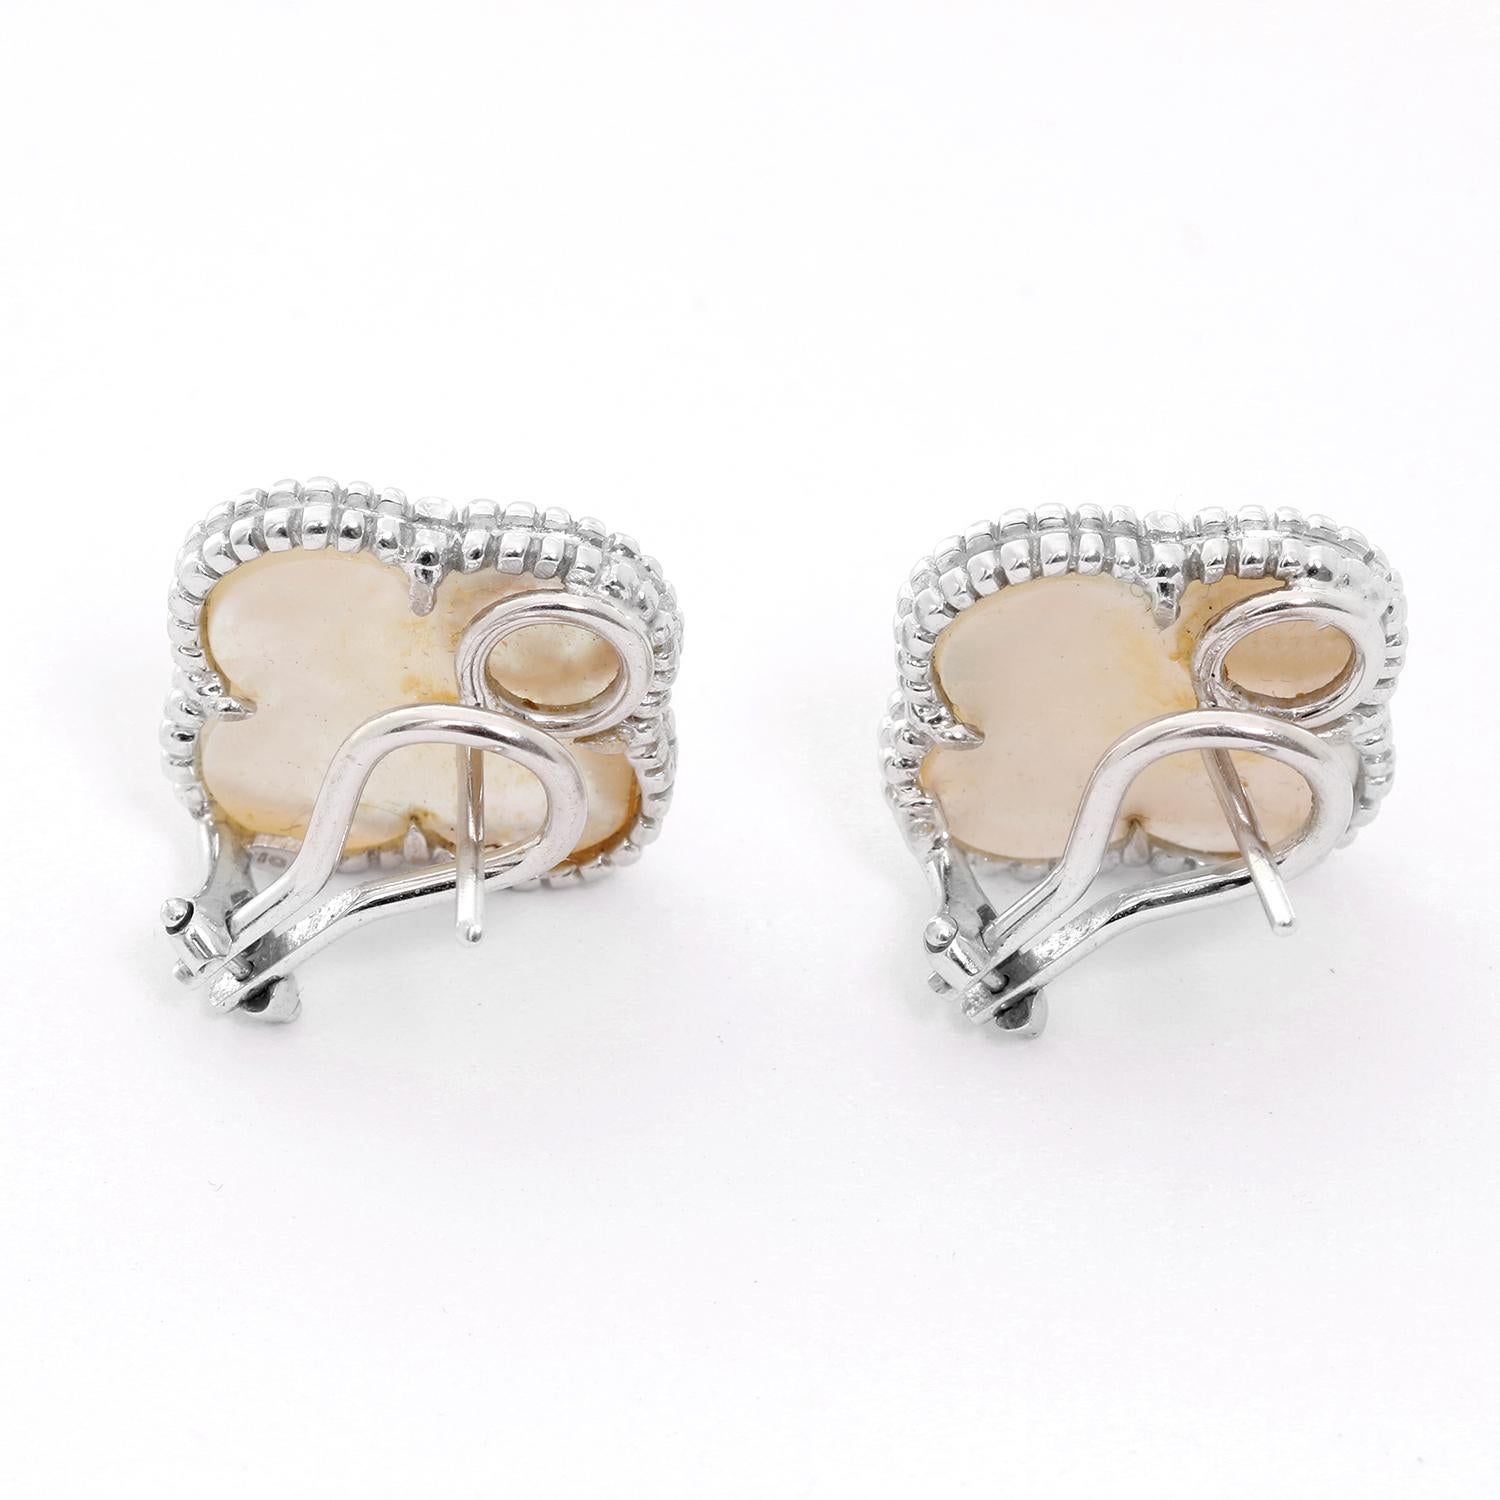 Van Cleef & Arpels Vintage Alhambra Earrings  - White gold Van Cleef & Arpels iconic clover motif. White Mother of Pearl set with round beaded outlines. Total weight 7.7 grams. 18 mm length. 